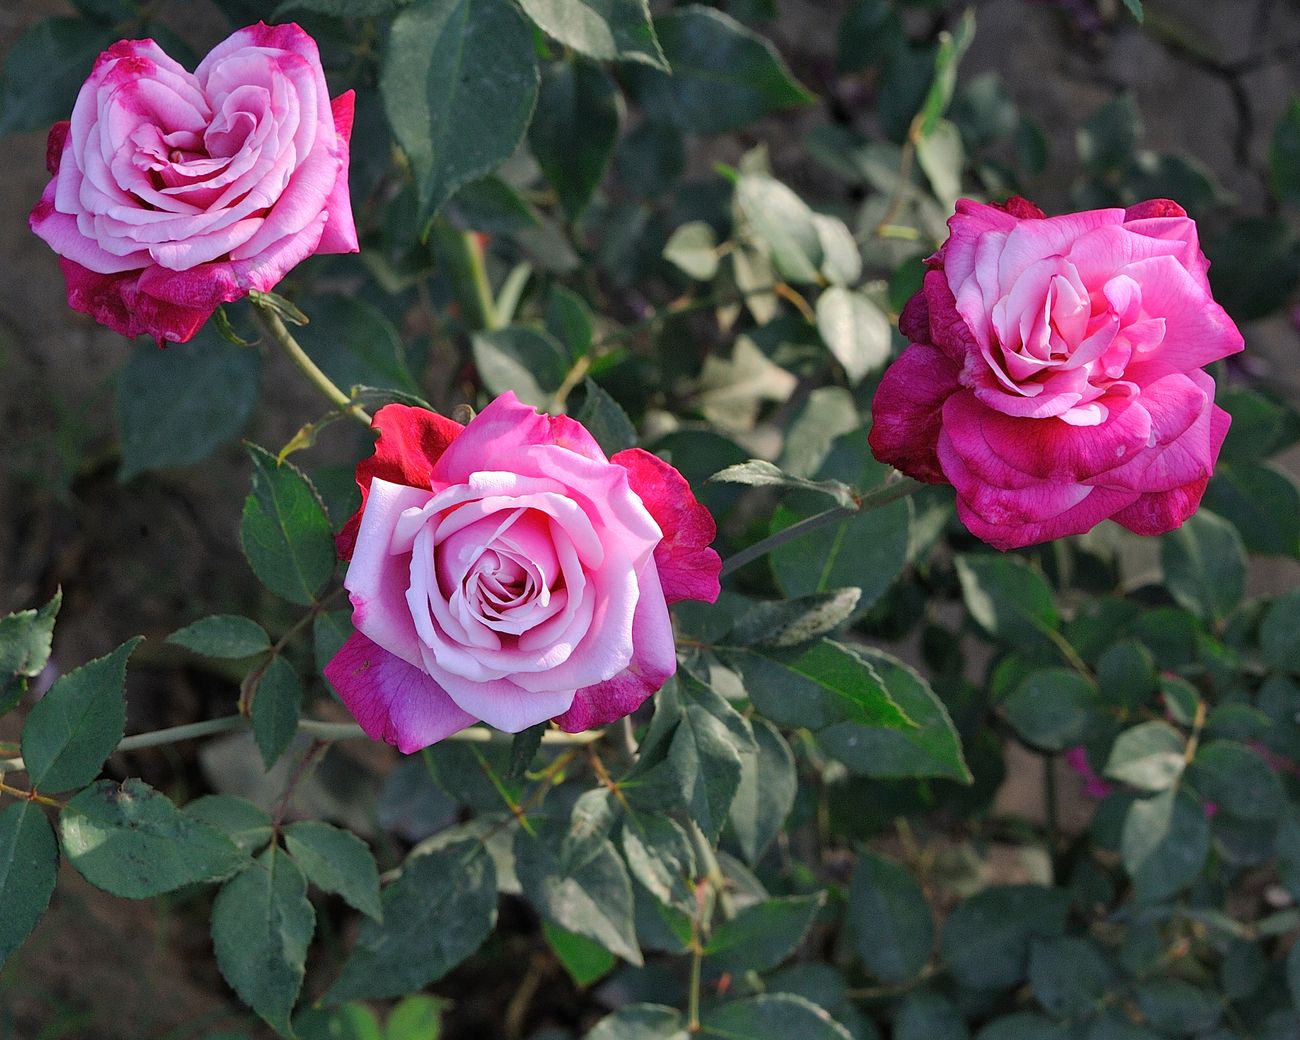 Pink roses blooming during the spring season in the otherwise scorchingly hot weather of Delhi 